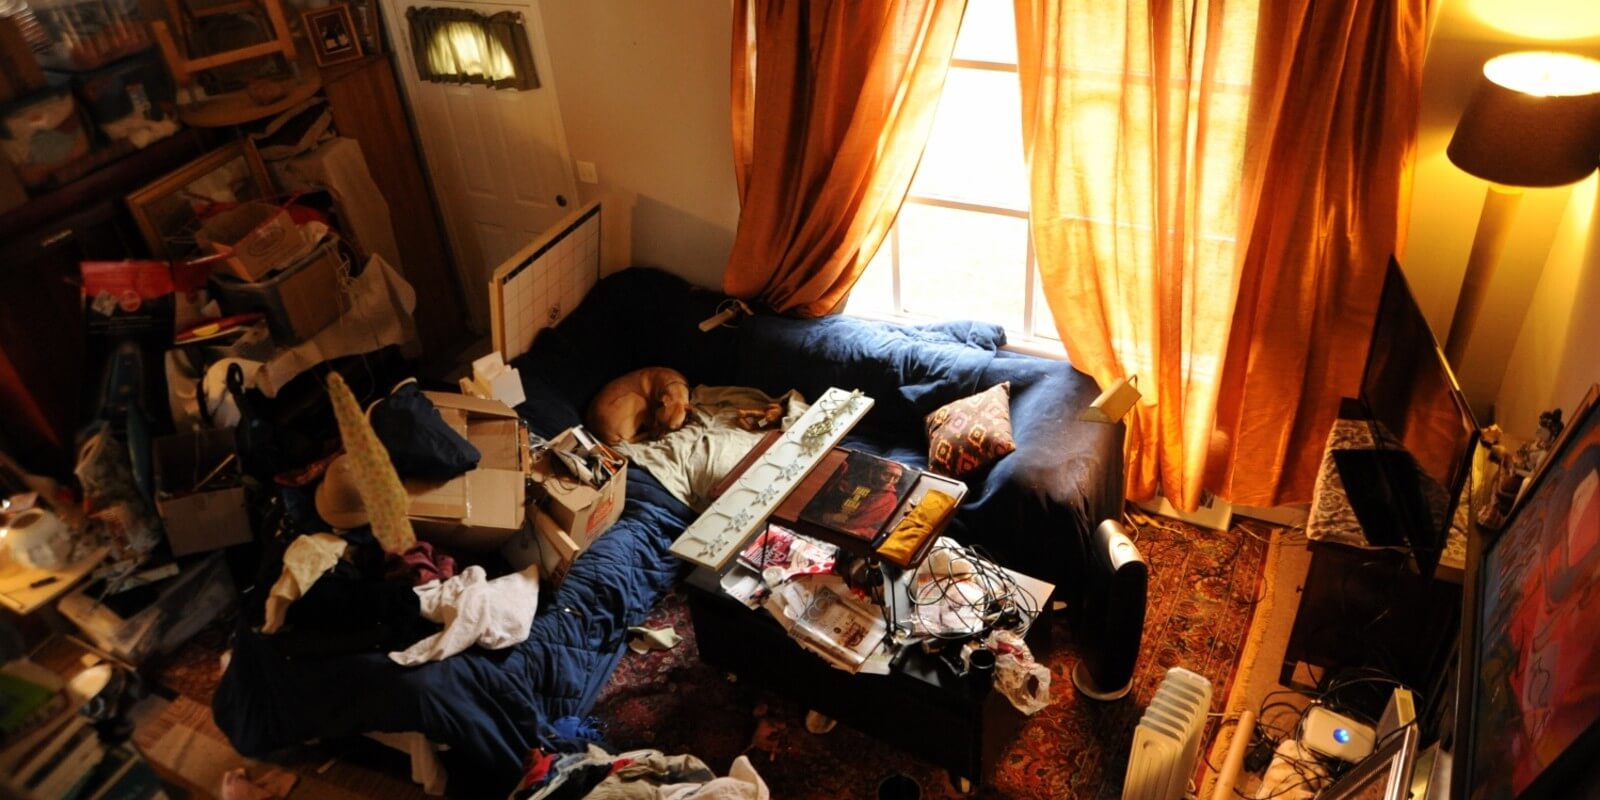 A messy home.